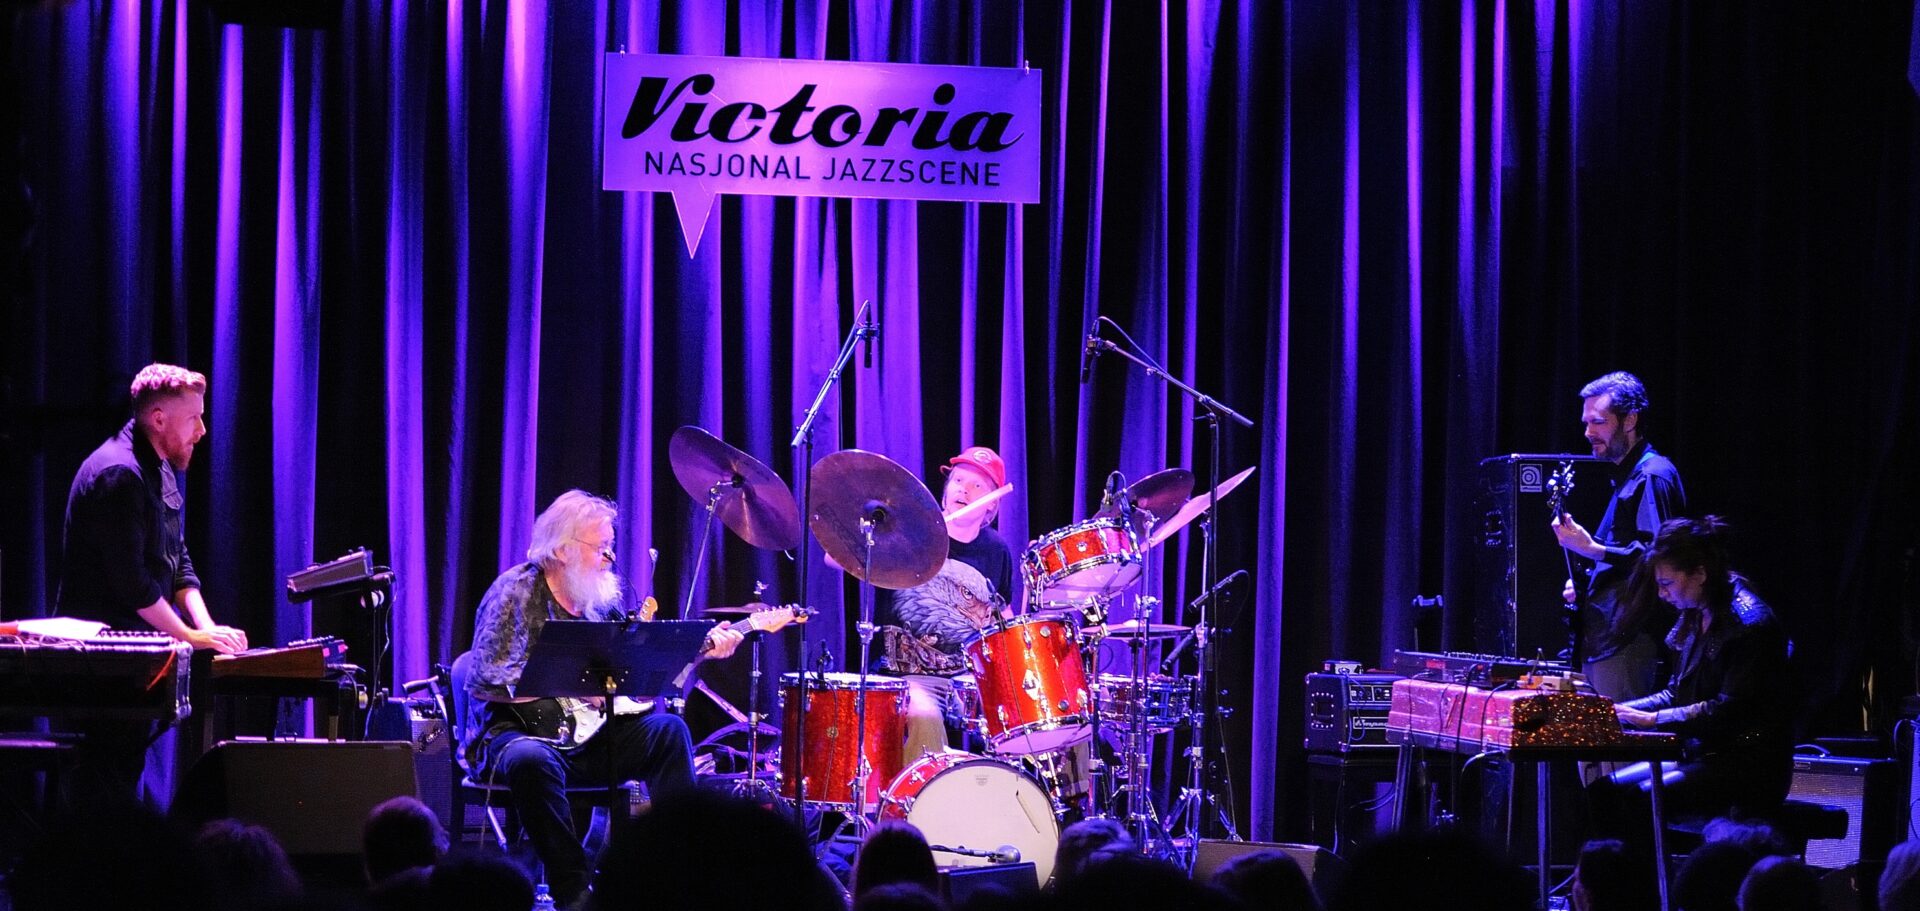 LIVE: Eberson at 70 (concert, reminiscences and birthday party) – Victoria Nasjonal Jazzscene, Oslo, 25/02/2023 1